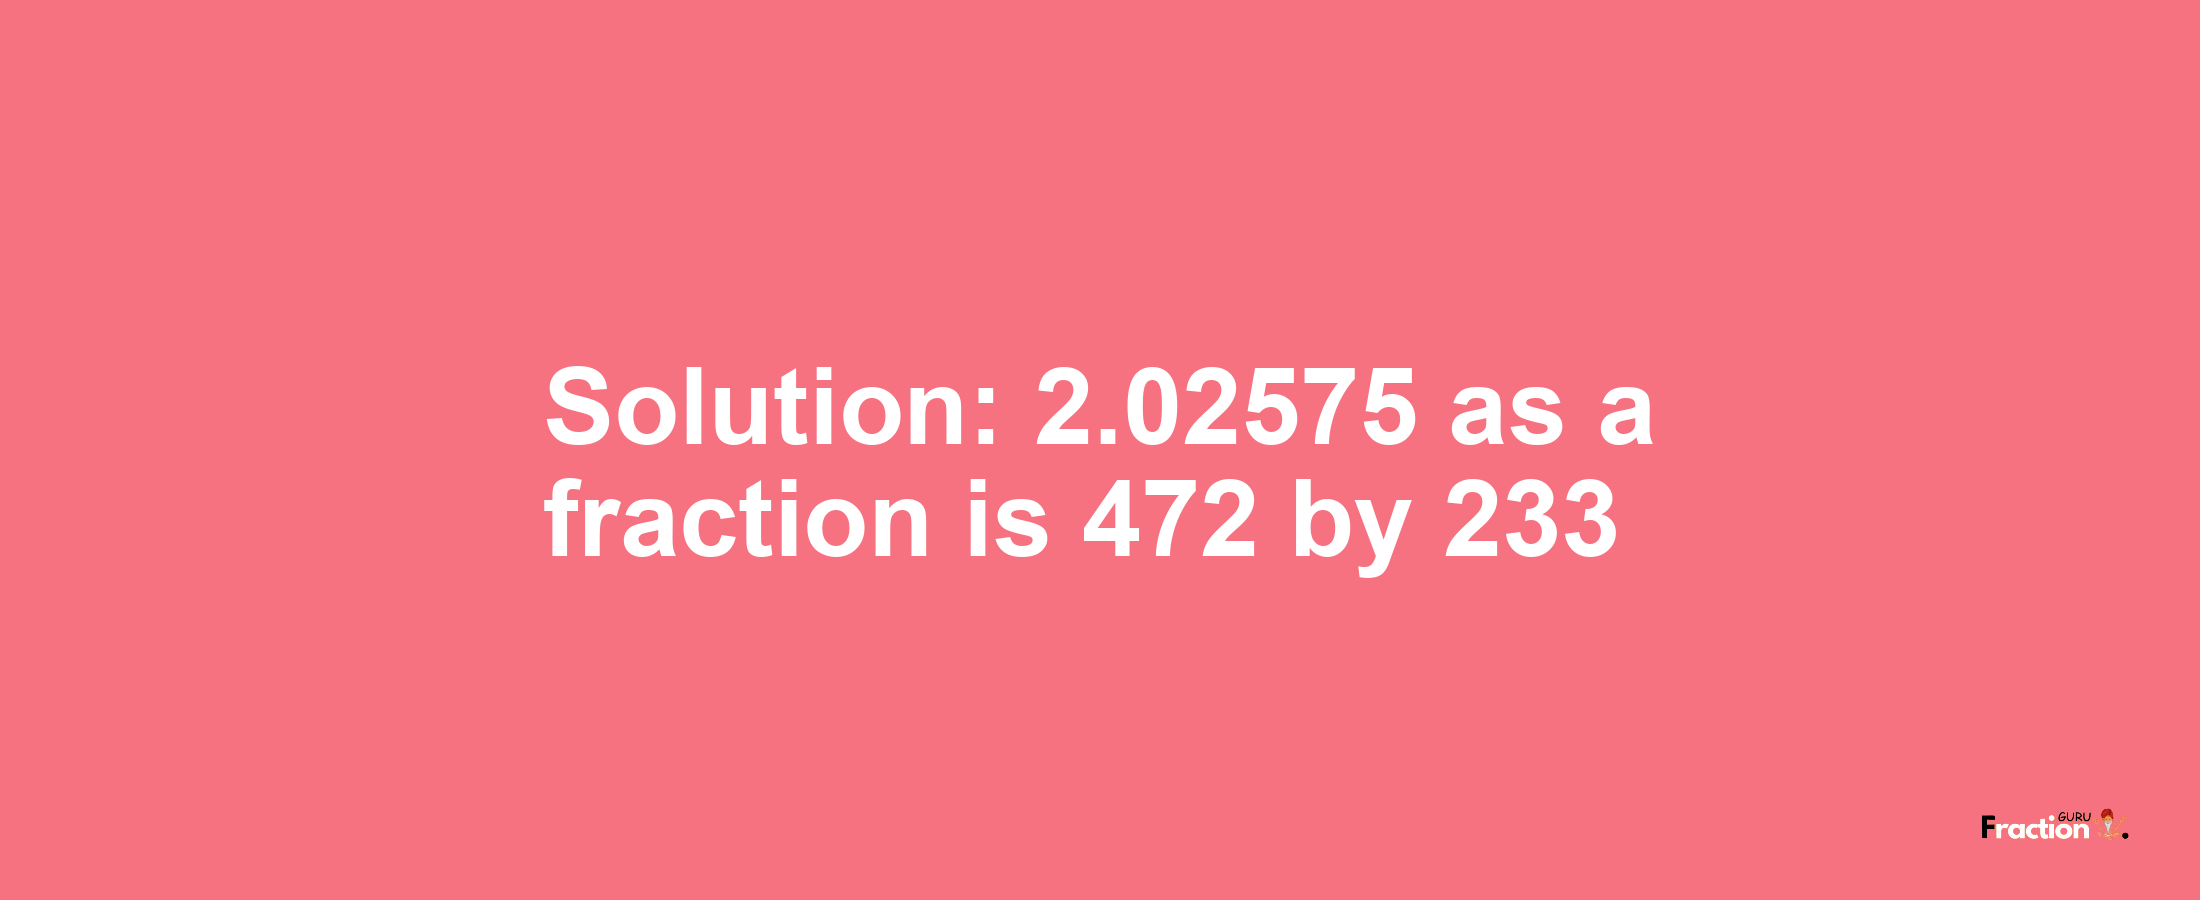 Solution:2.02575 as a fraction is 472/233